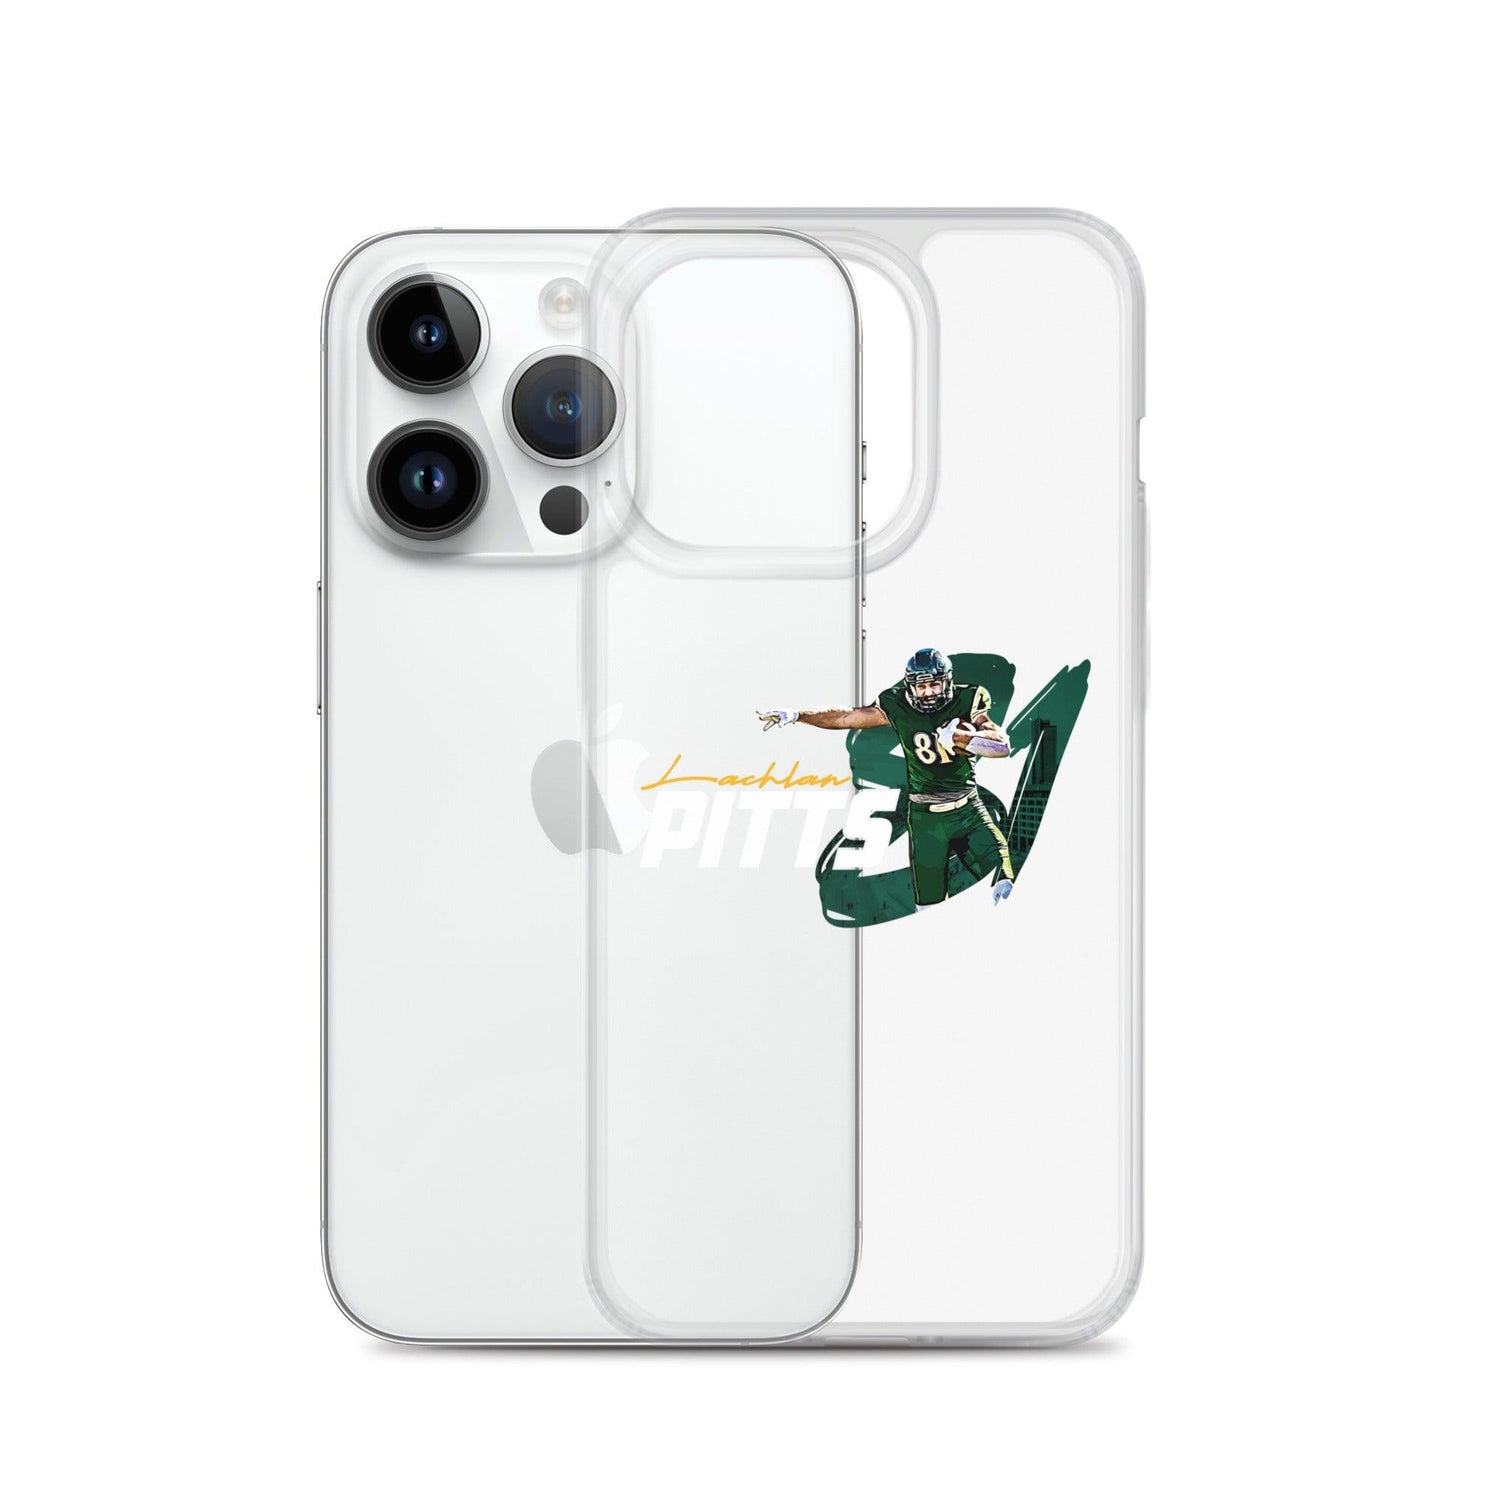 Lachlan Pitts "Gameday" iPhone Case - Fan Arch